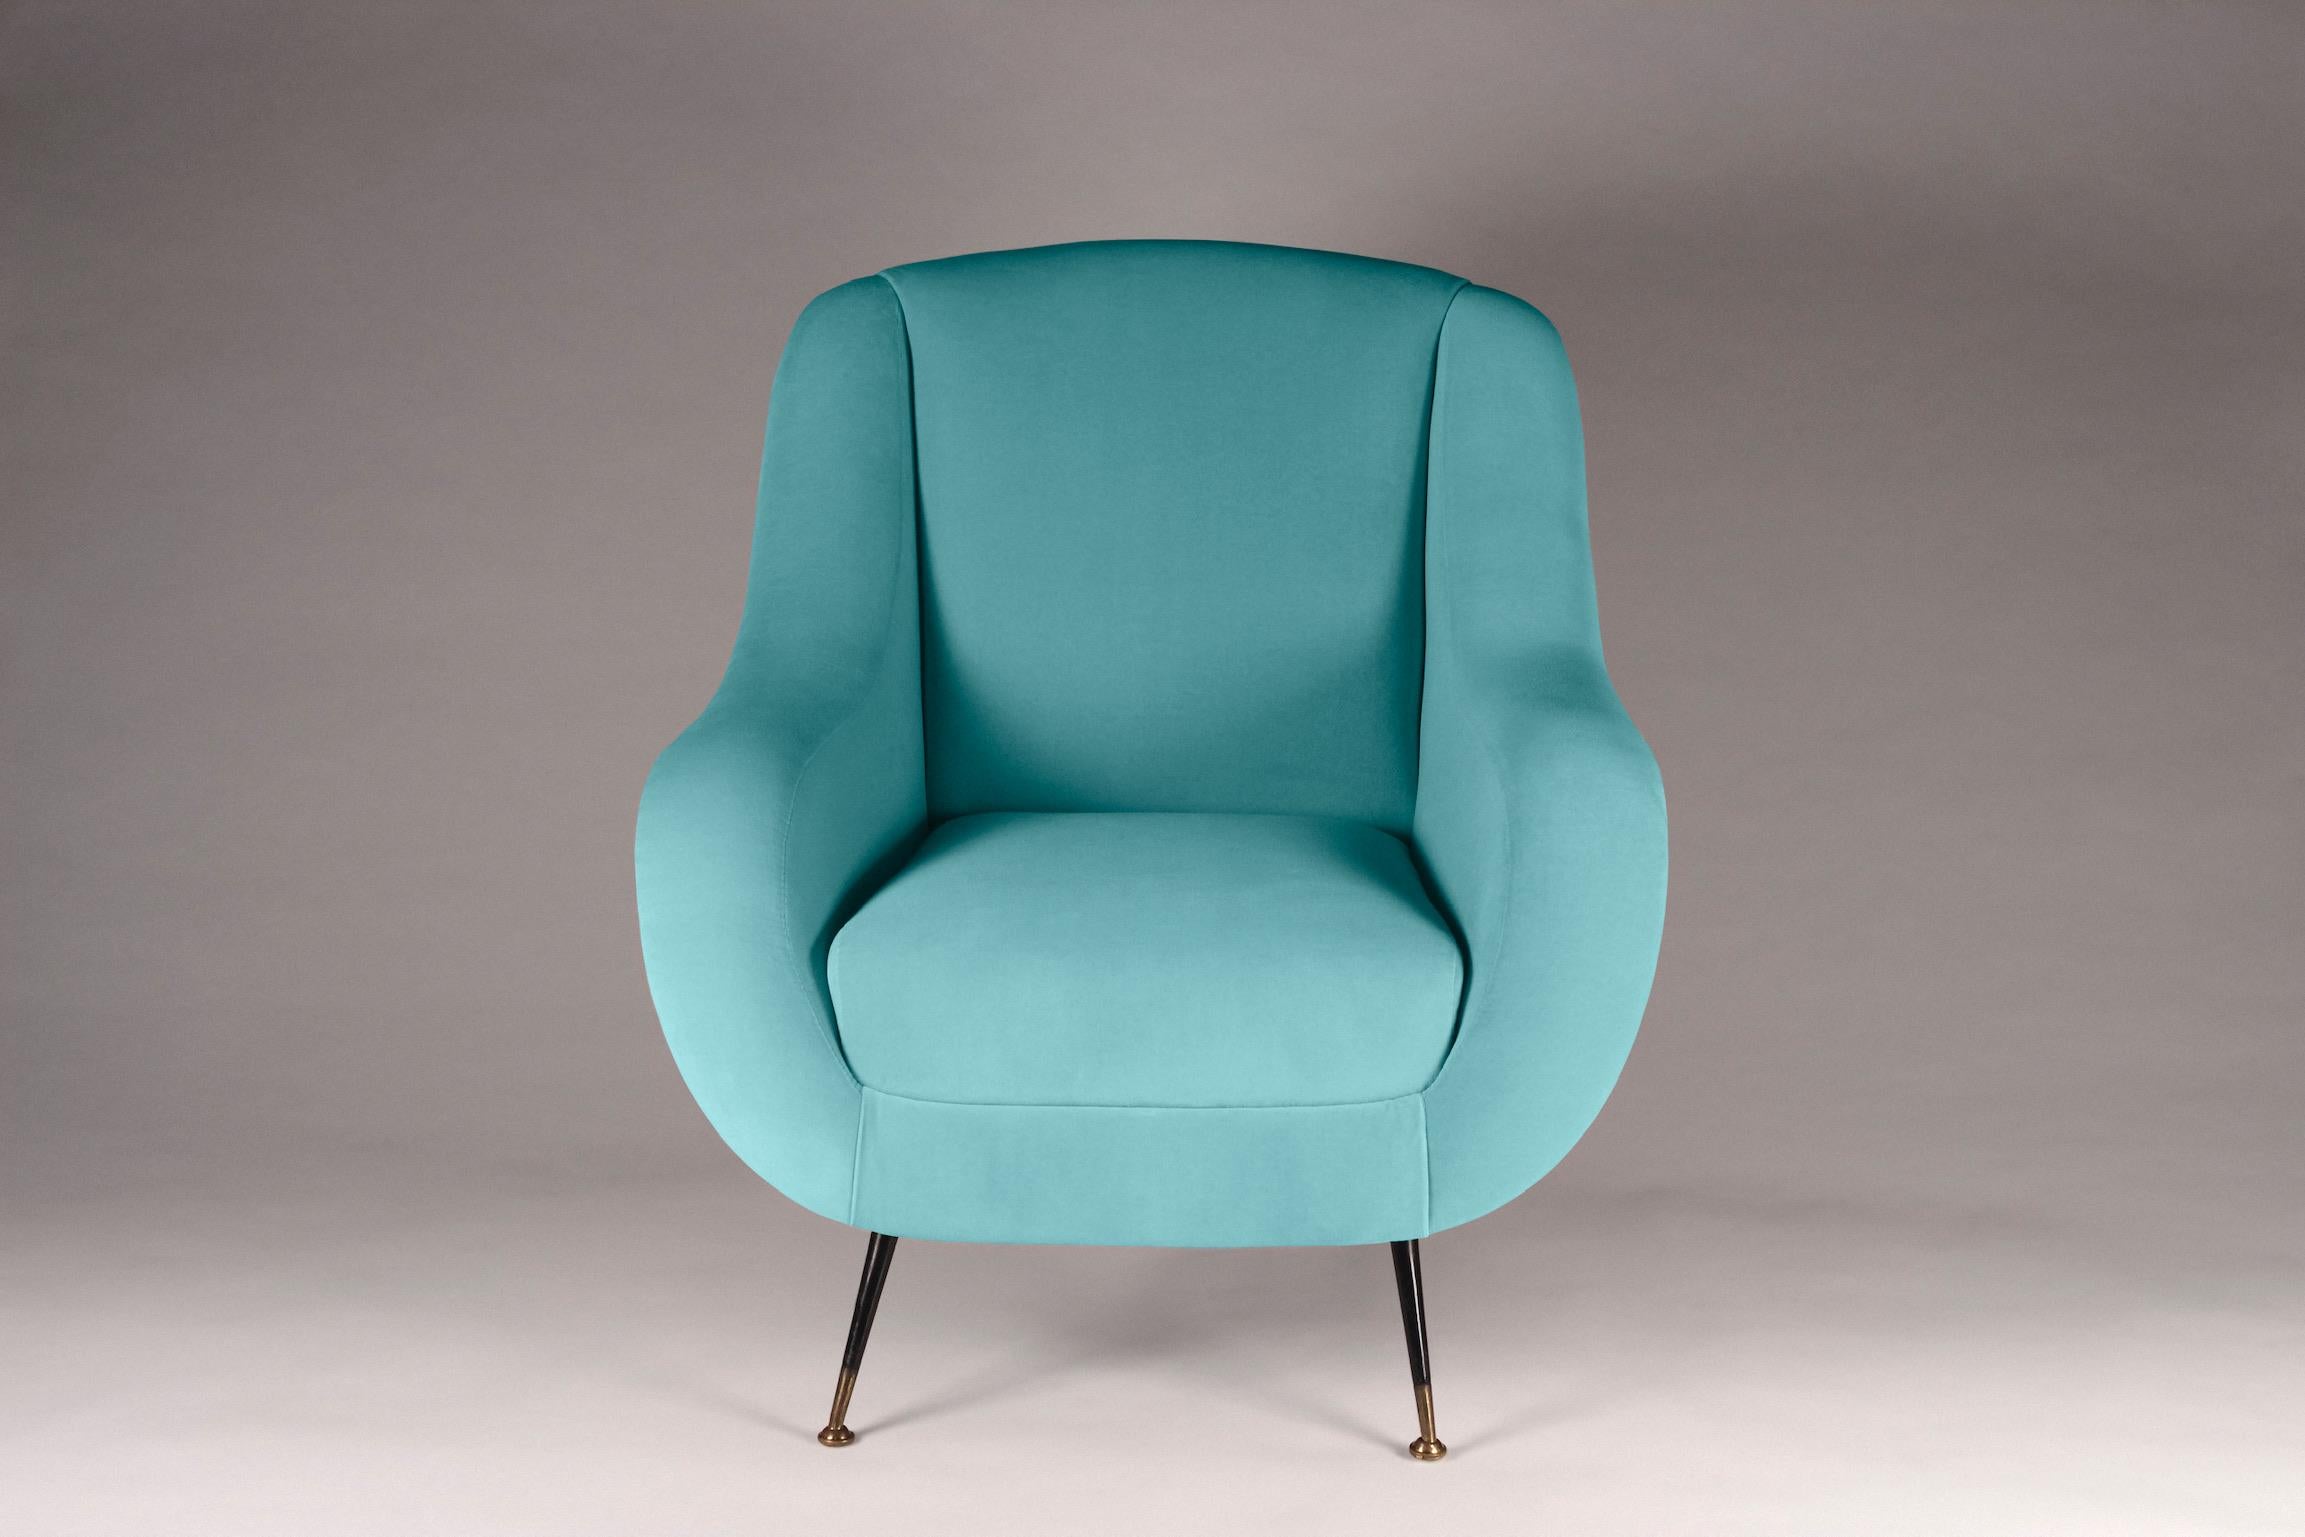 Sophia was inspired by stylish Italian design from the 1950s and is now created by English craftsman for the 21st century. We developed a lounge chair with the option of producing any number to your fabric specification. The price quoted is based on